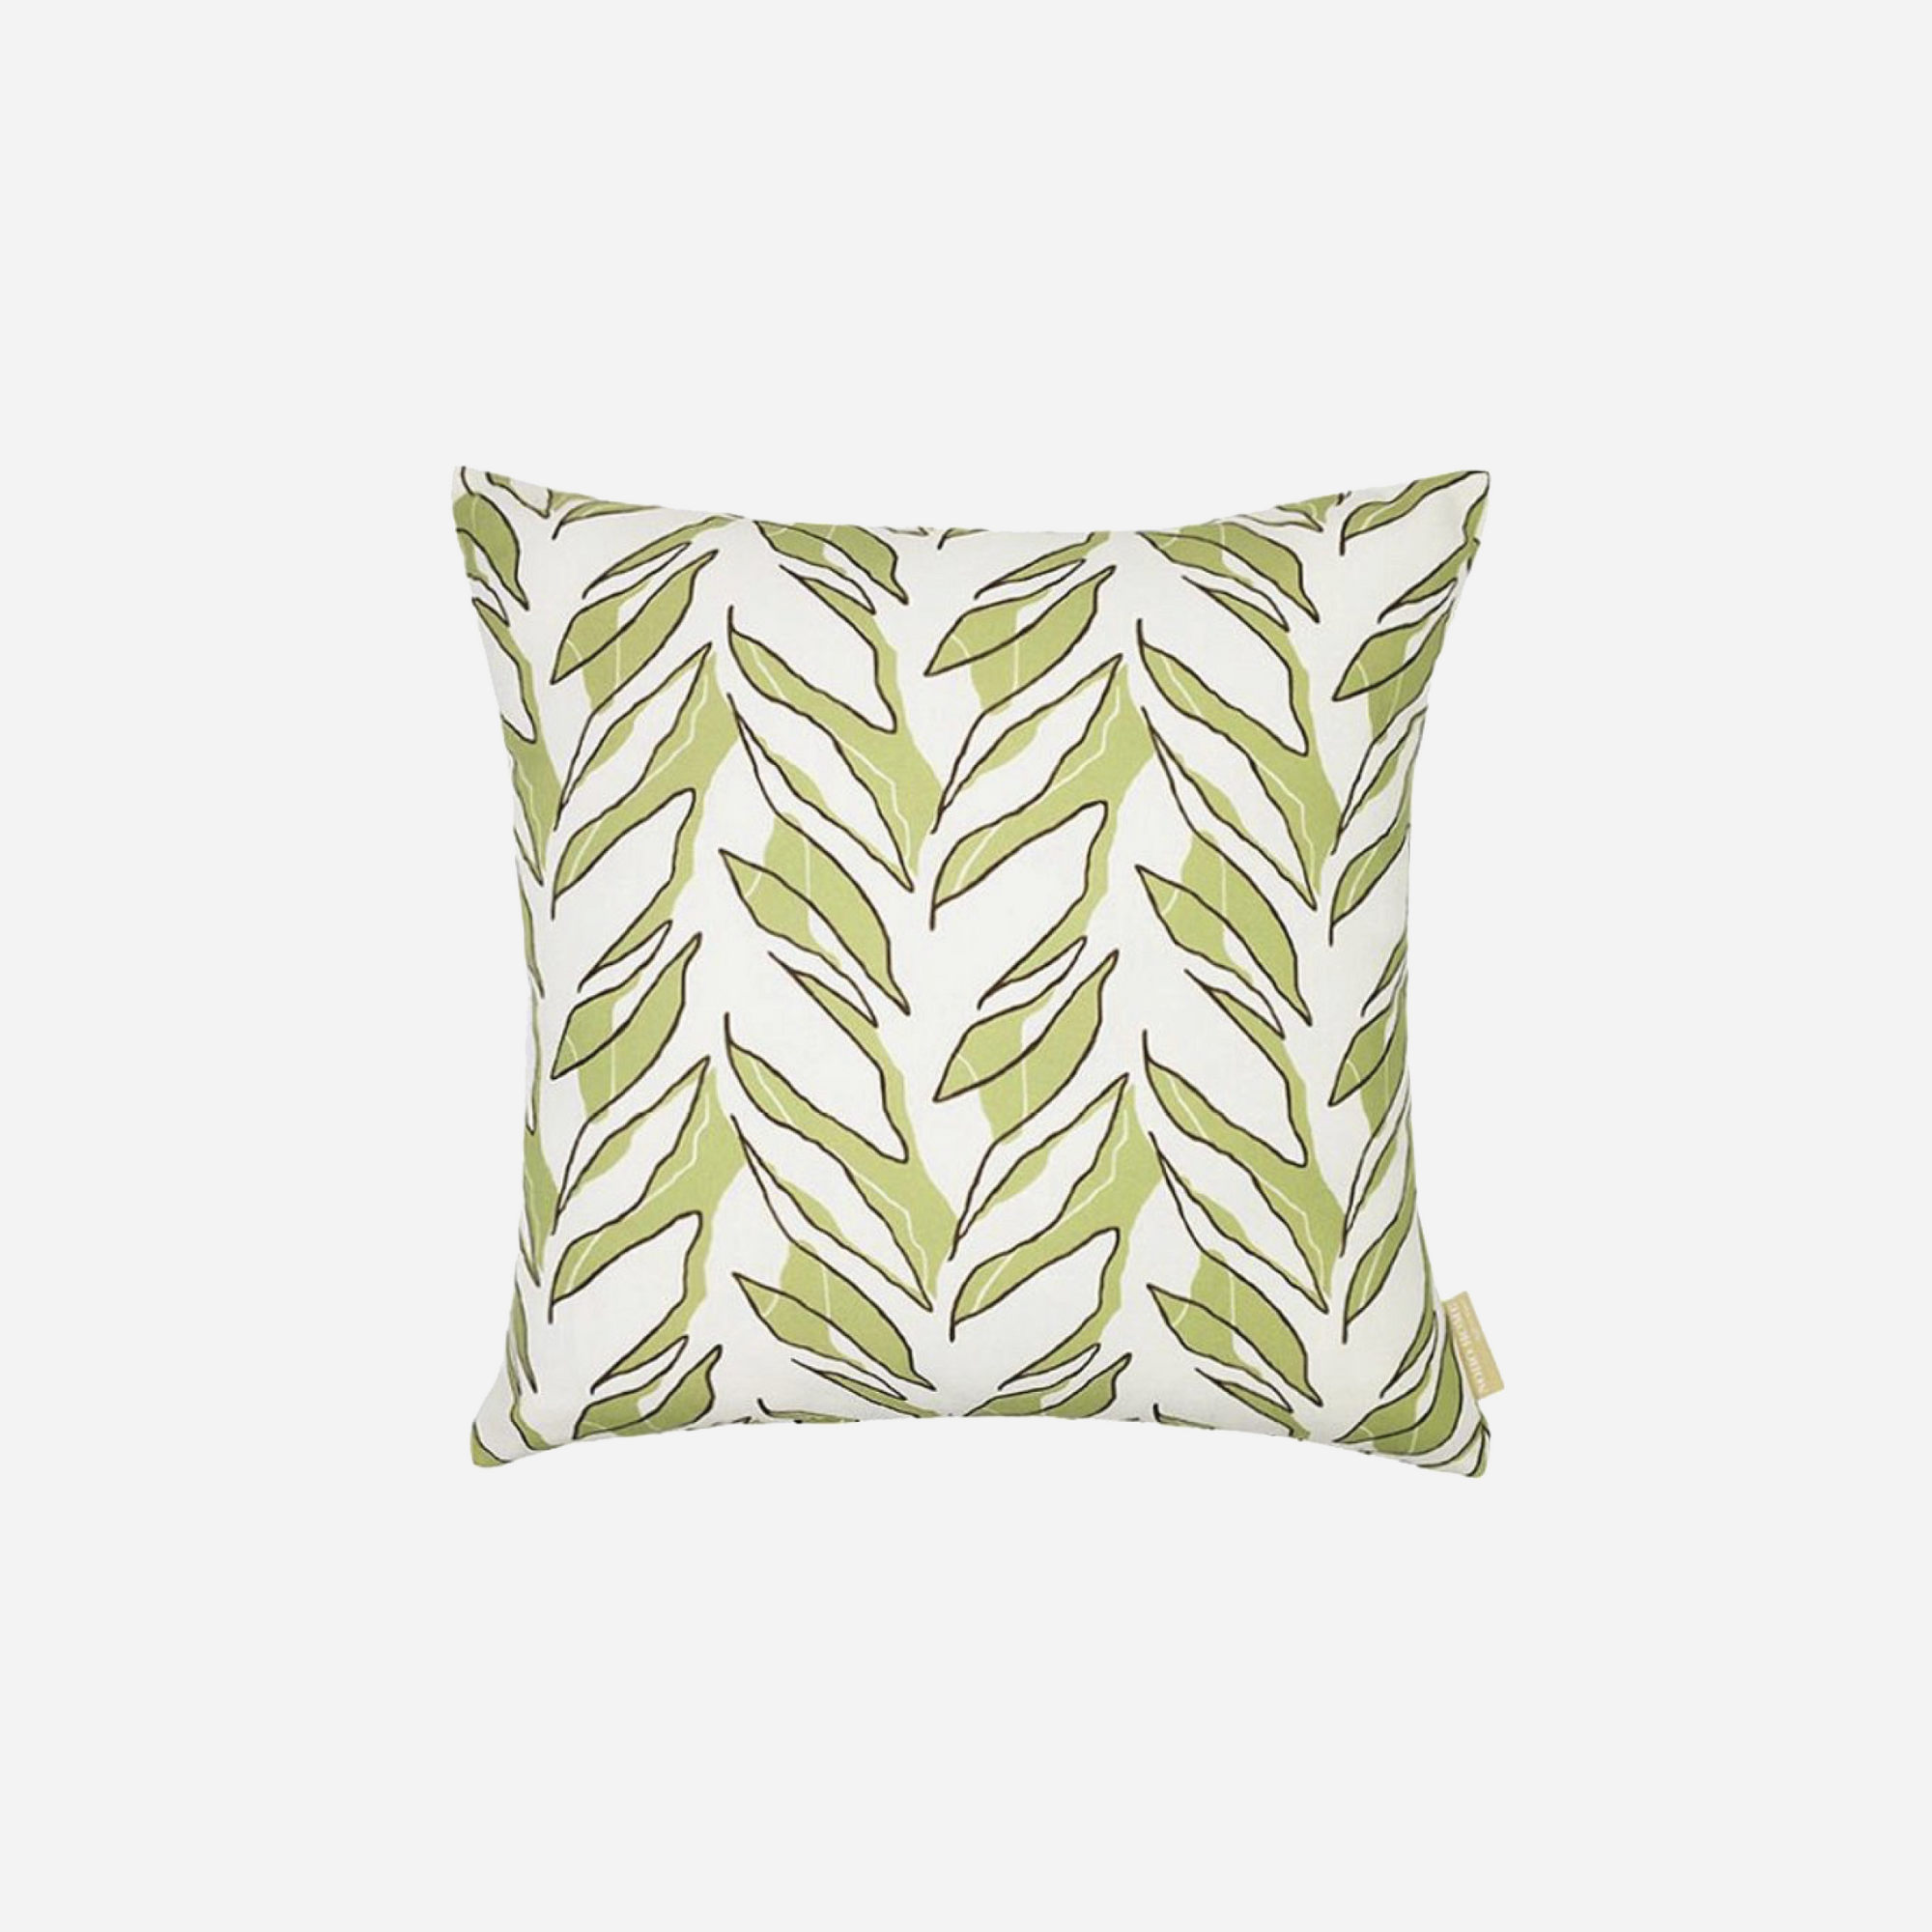 *Noho Home Decorative Pillow Covers 20"x 20"